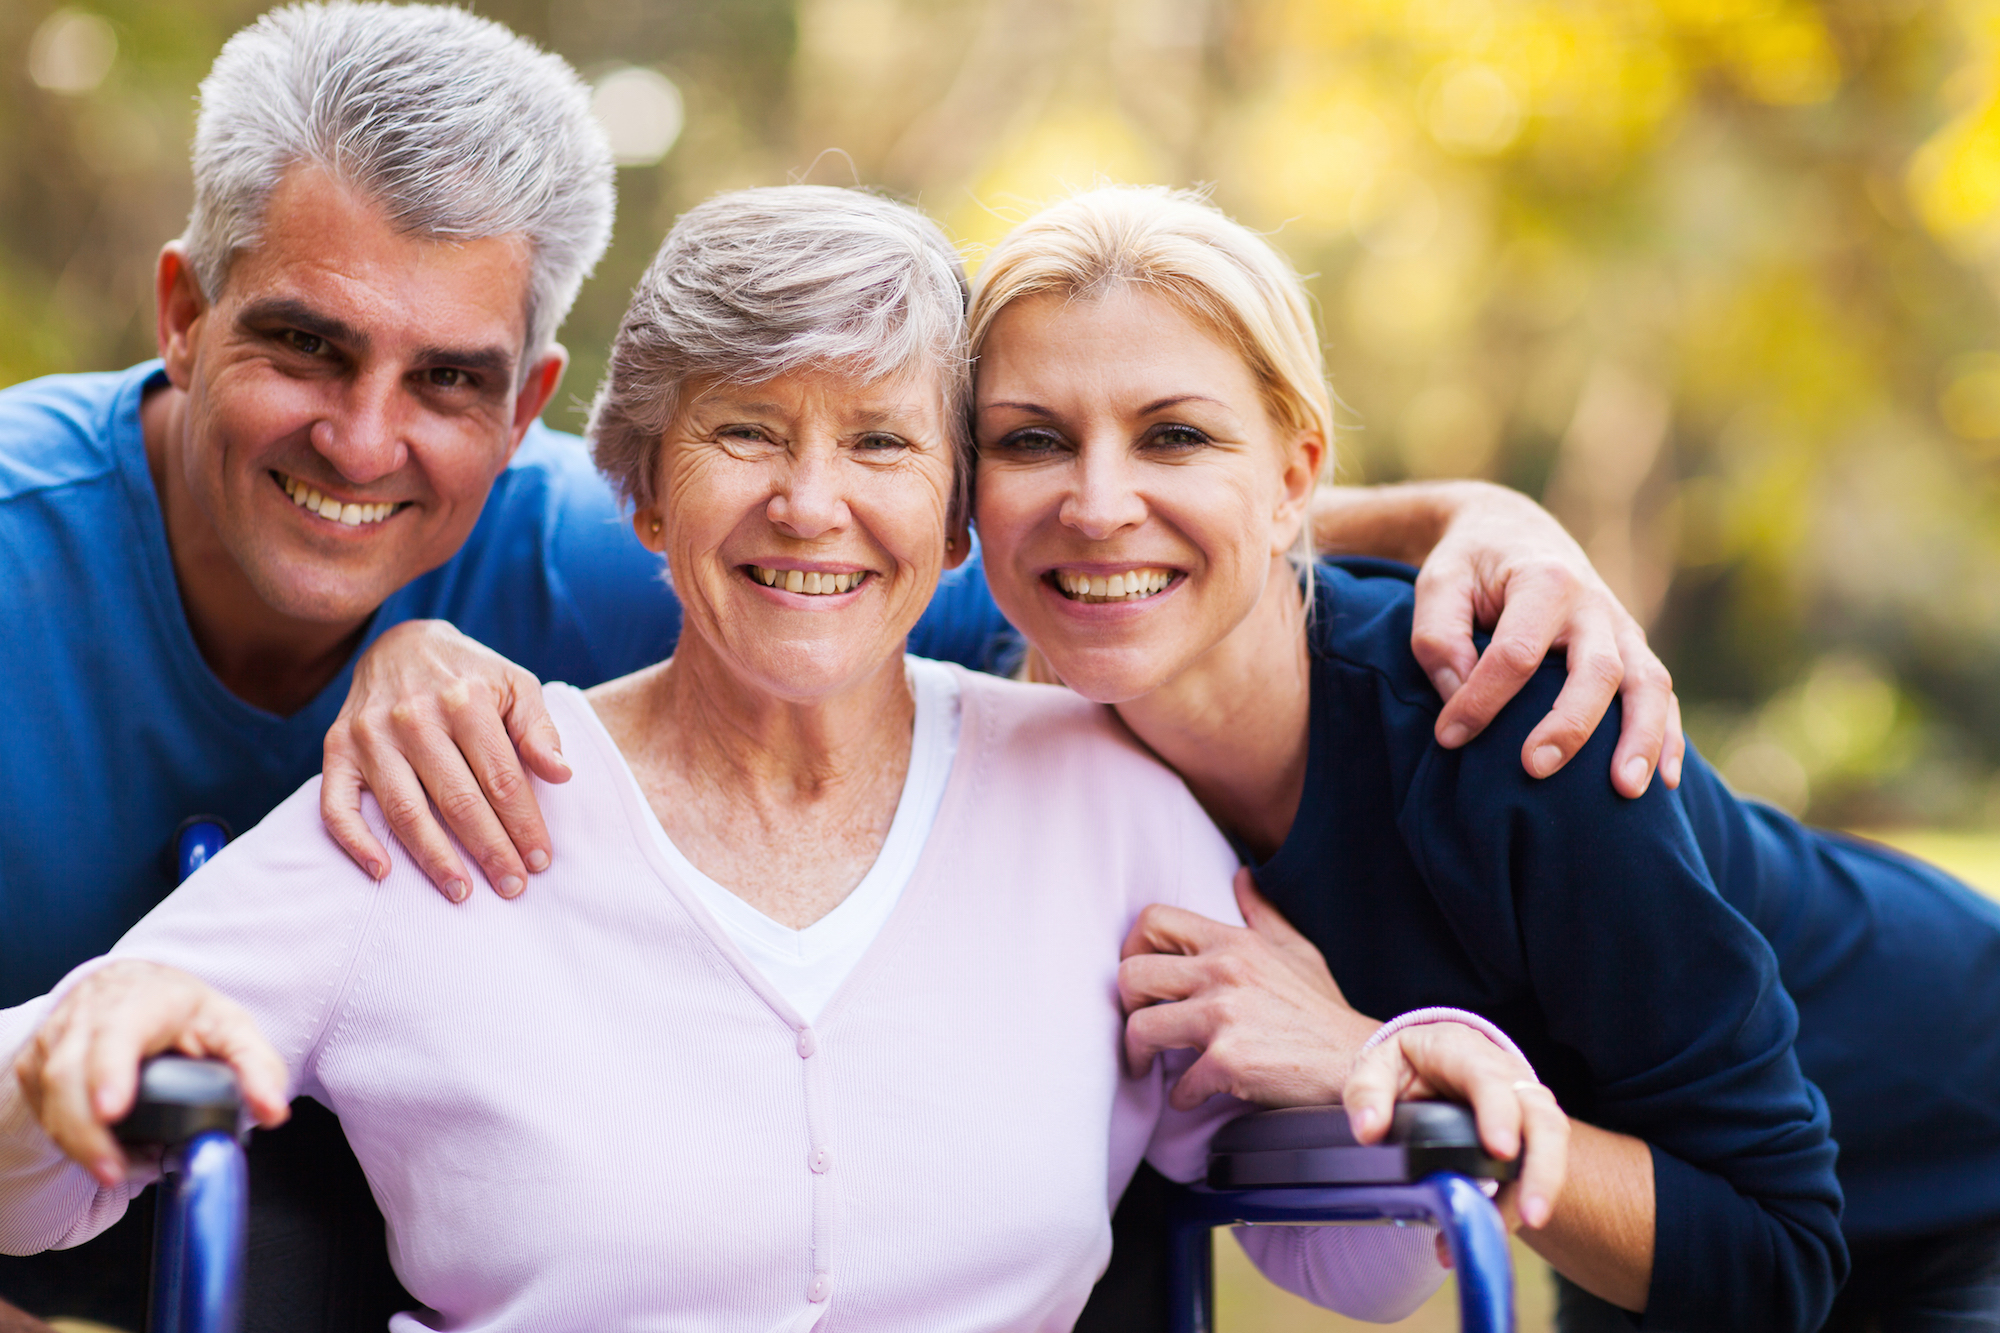 How to Find a Caregiver